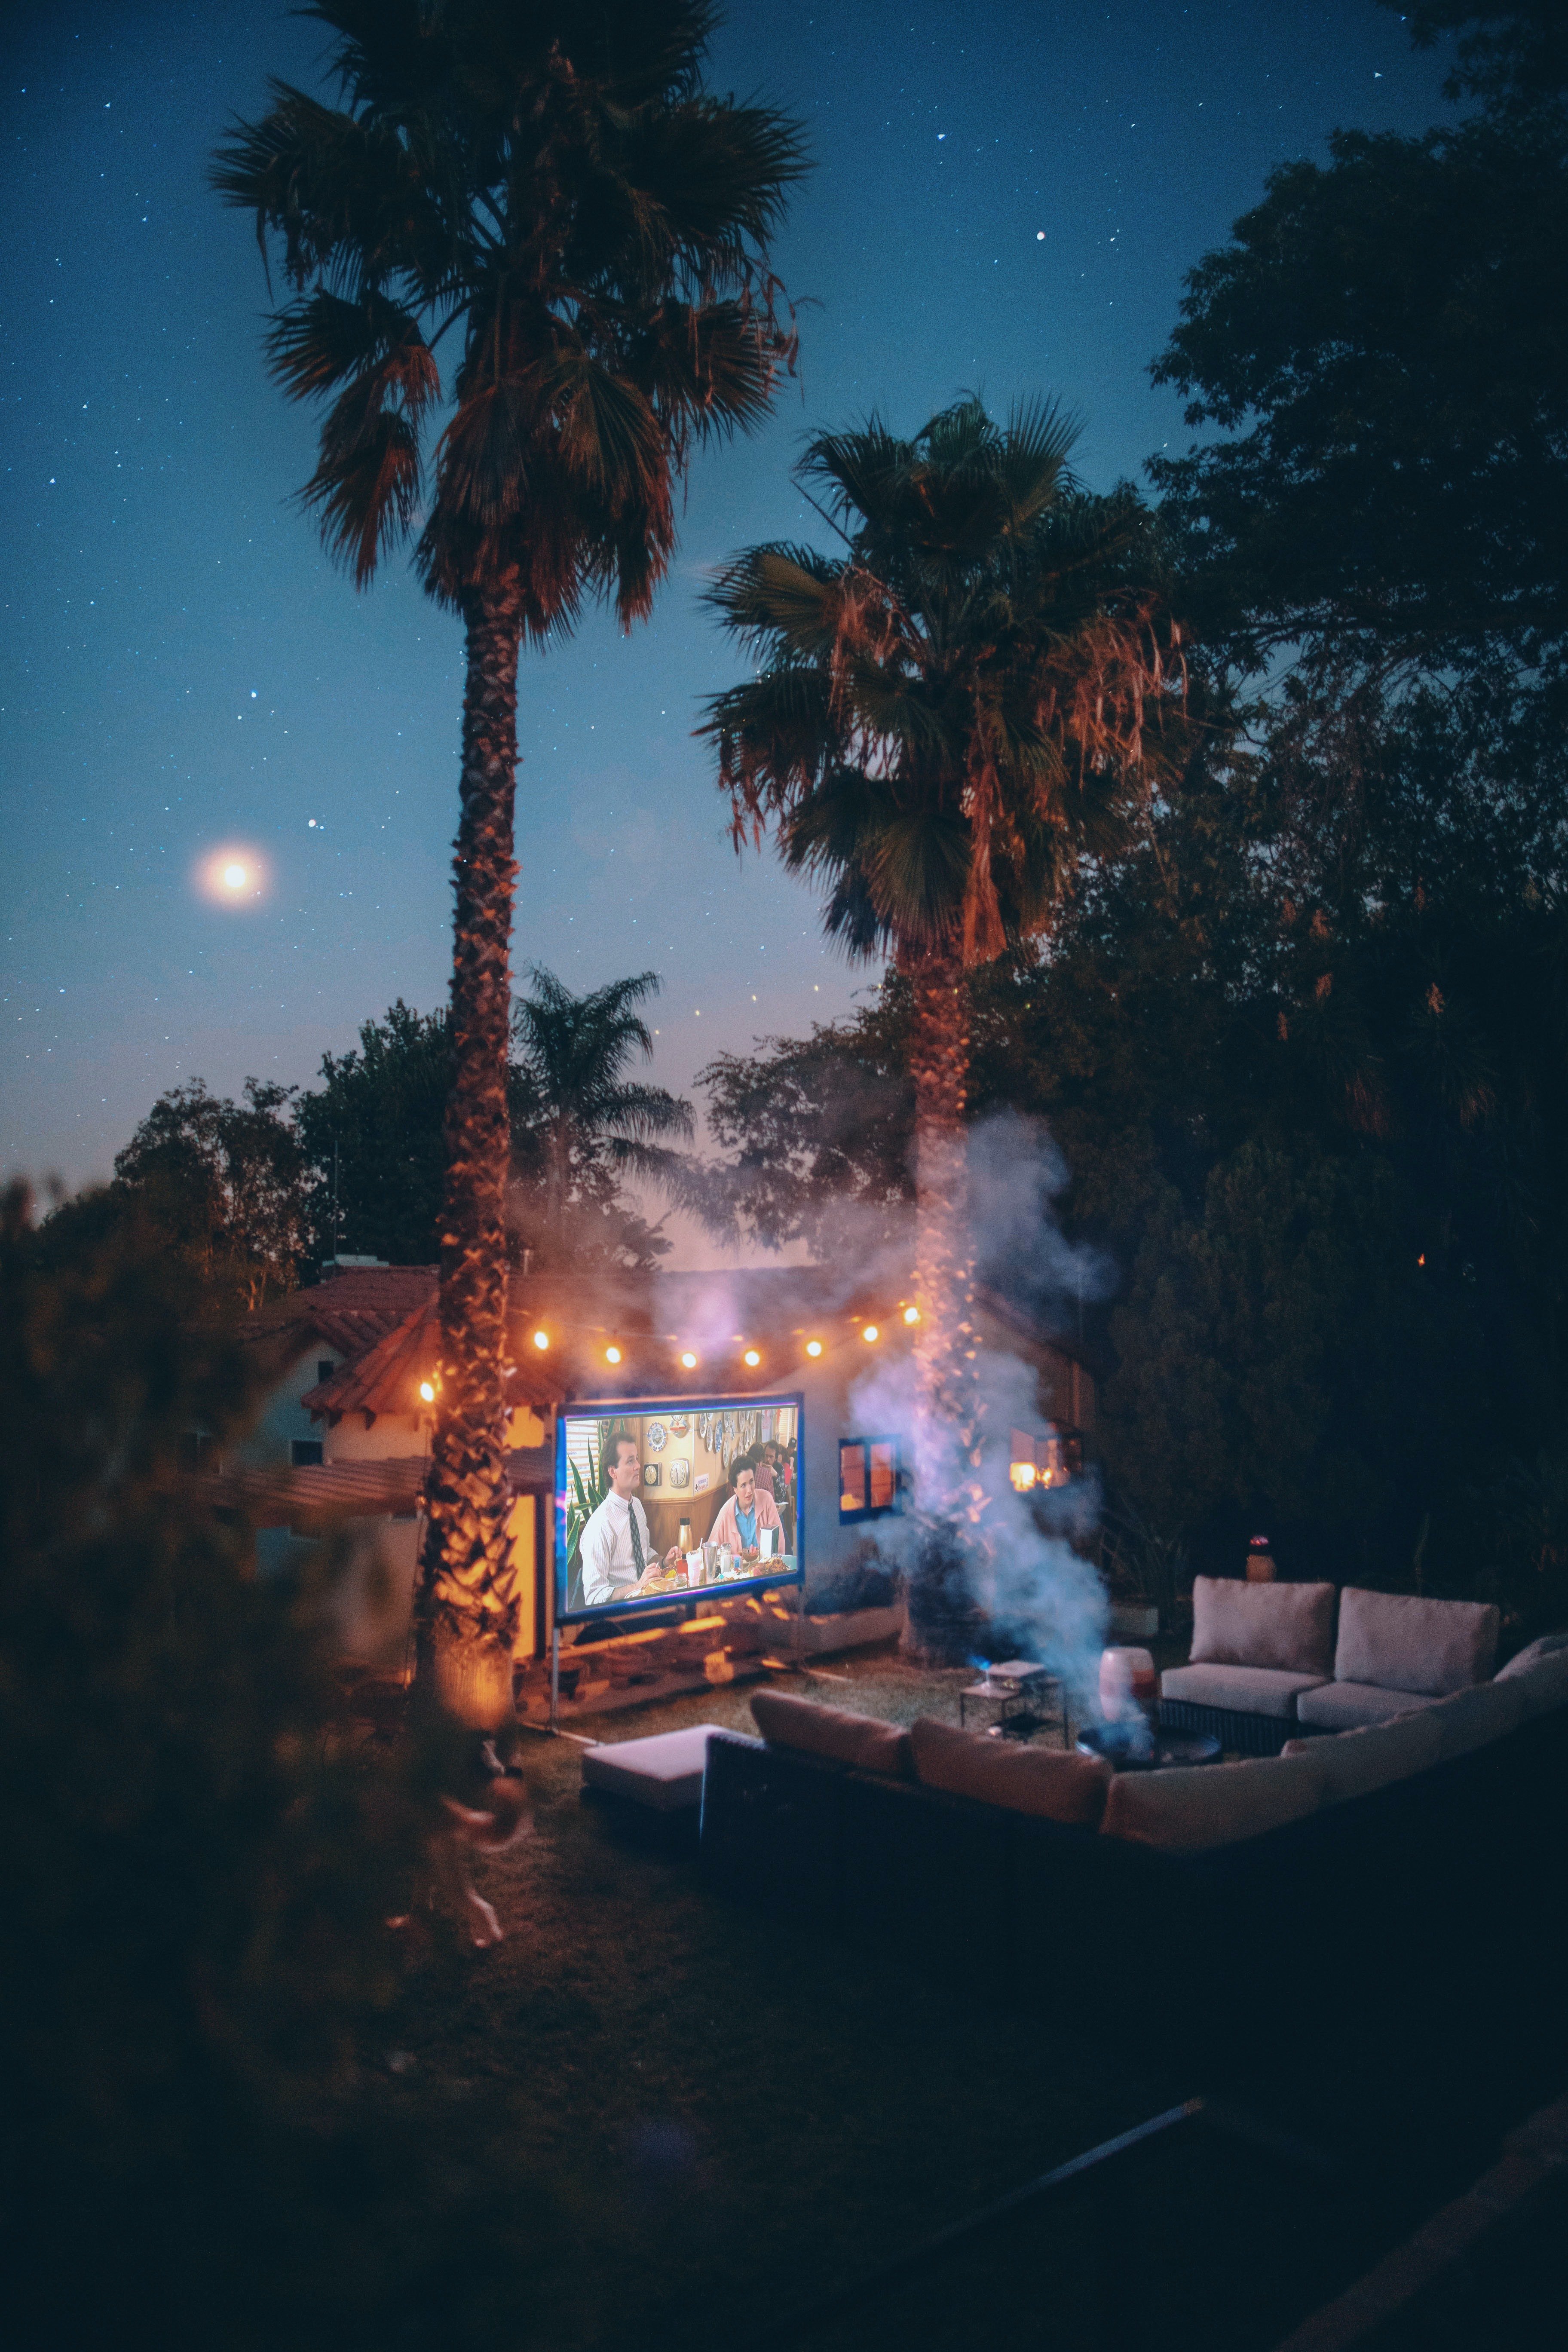 Michael's grandfather prepared an outdoor viewing deck for the occasion. | Source: Pexels